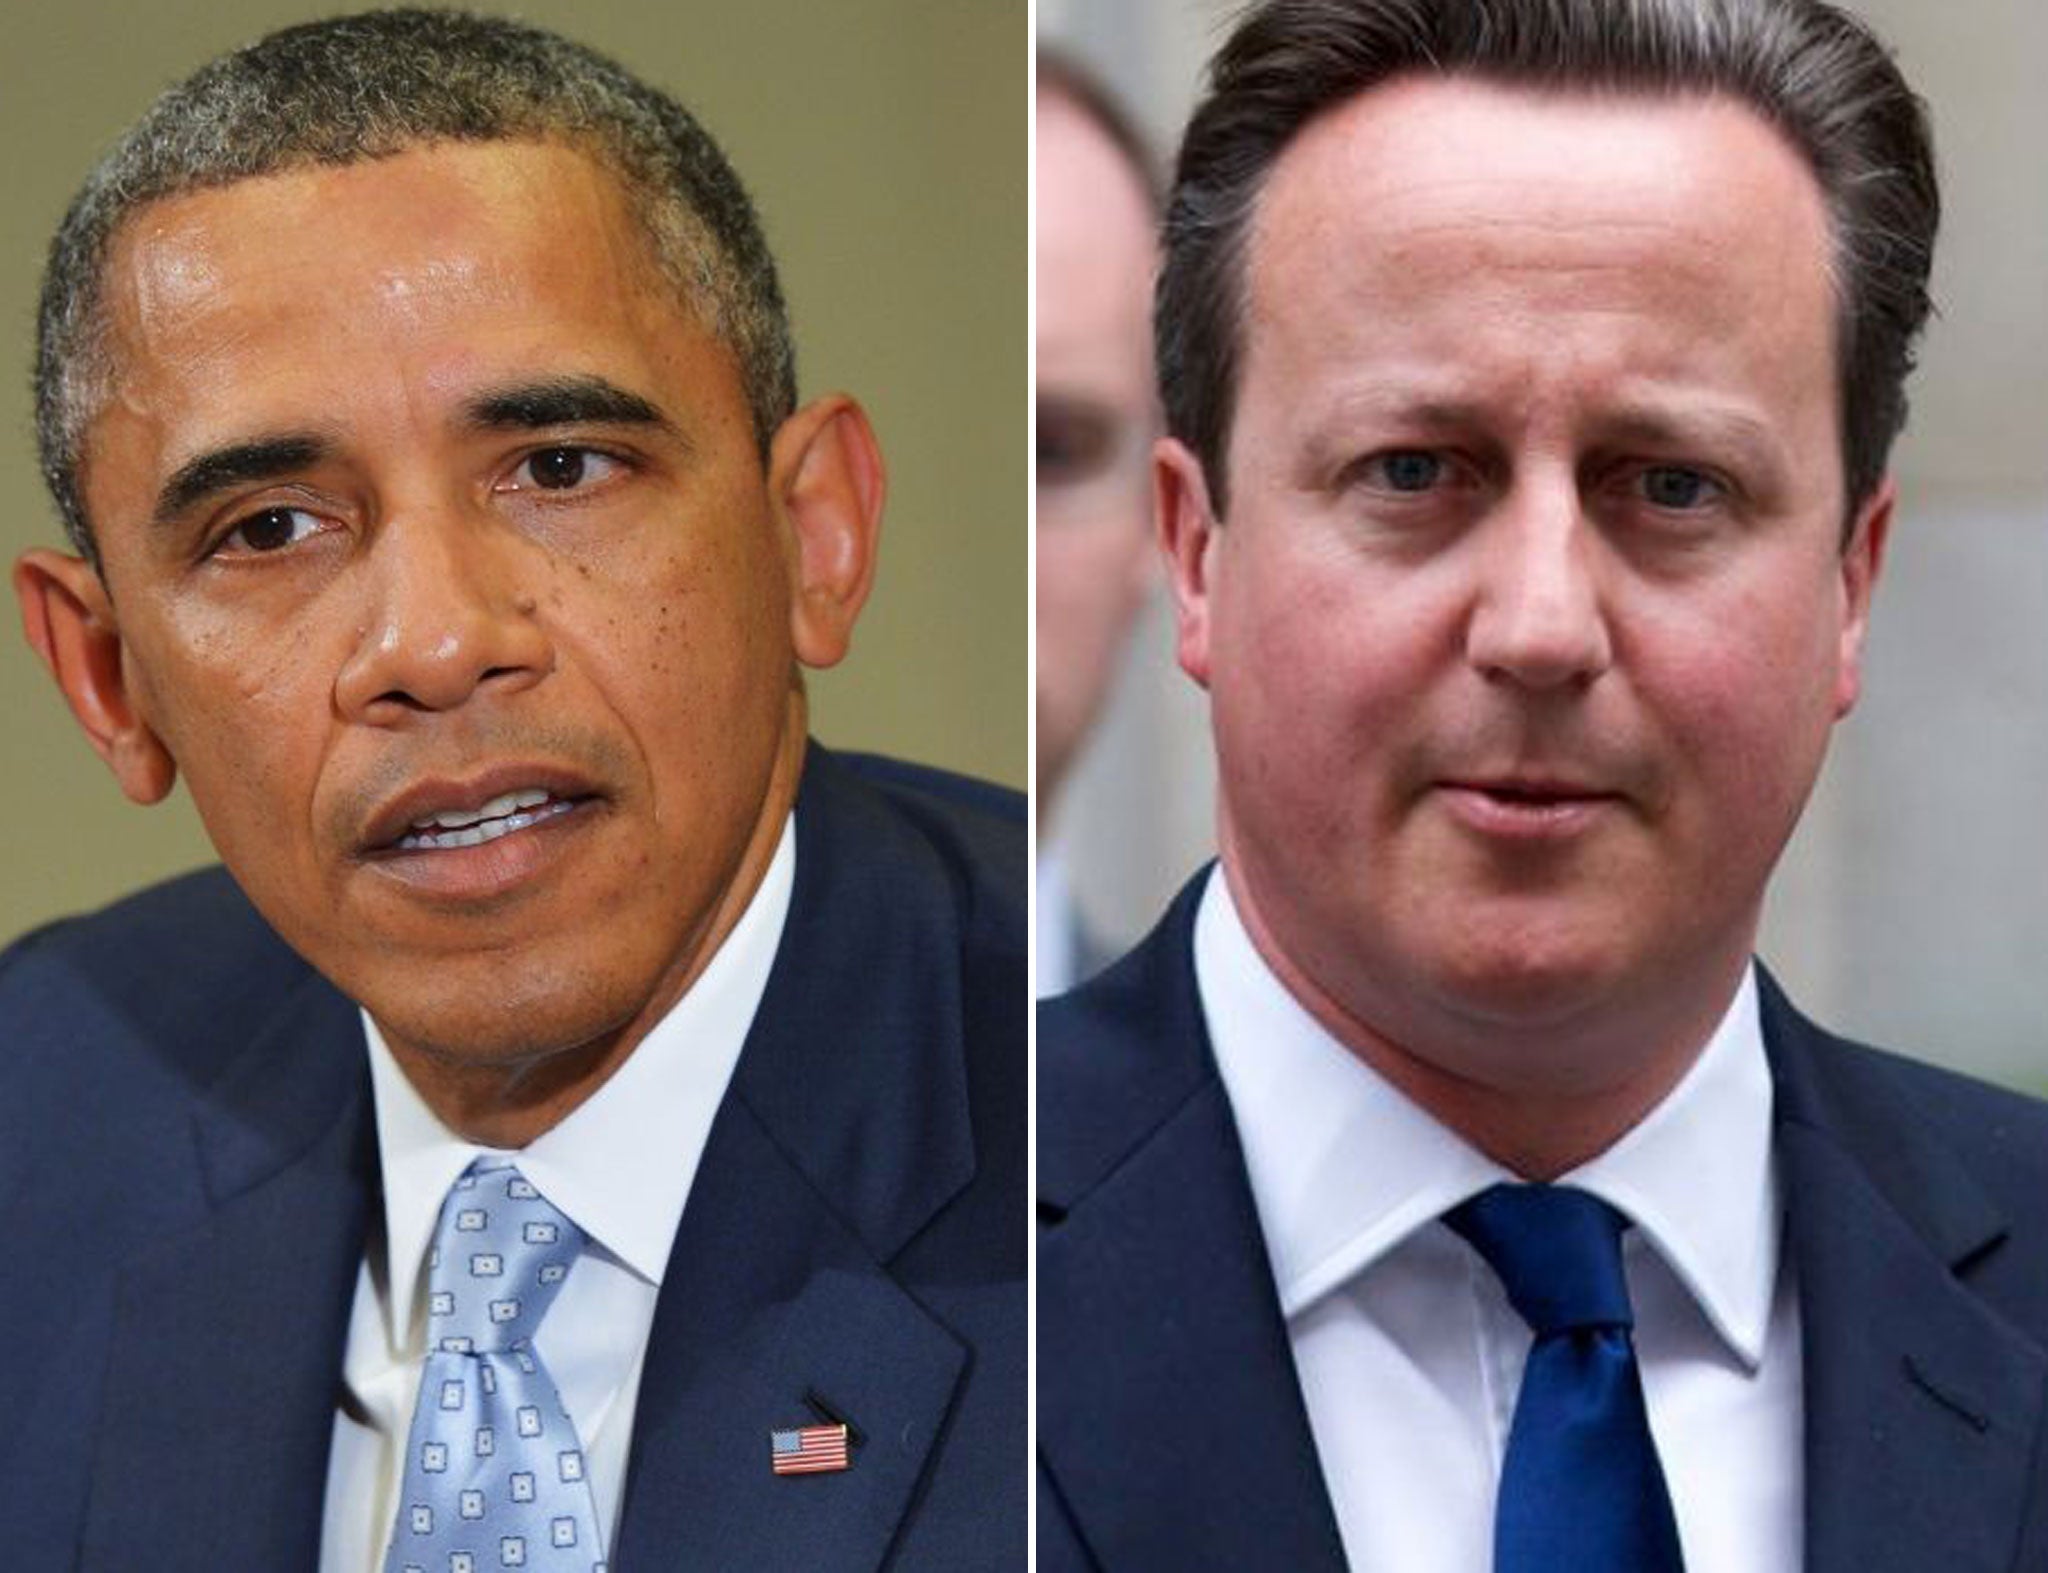 Barack Obama (left) and David Cameron (right) have both had their IQs surpassed by a two-year-old